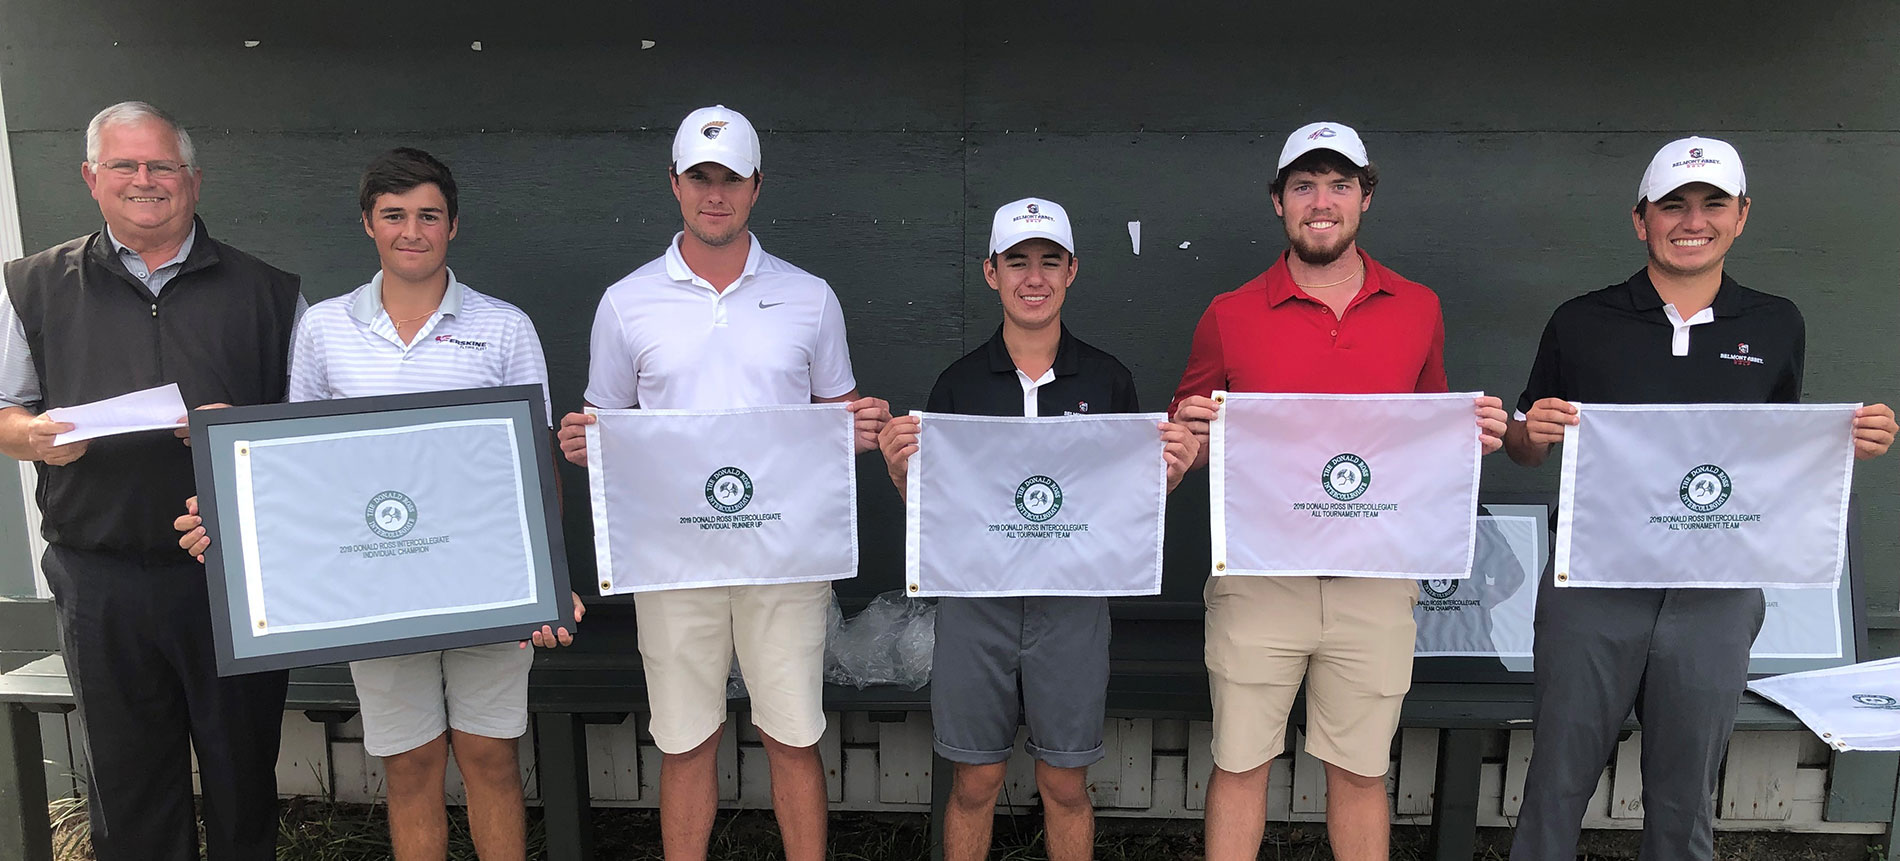 Men’s Golf Wraps up Fall Season with Second-Place Finish at Donald Ross Intercollegiate